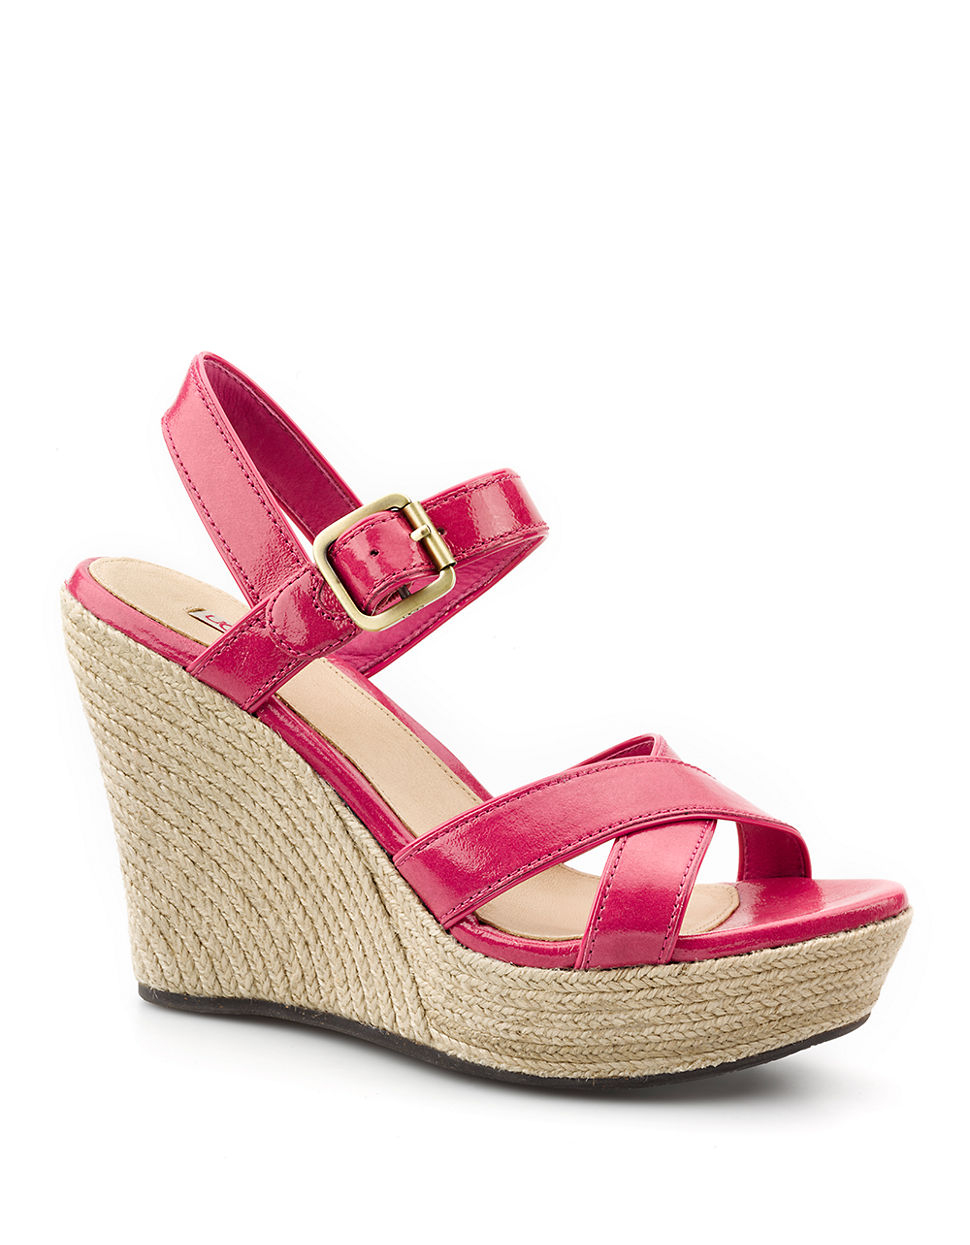 Ugg Jackilyn Leather Wedge Sandals in Pink | Lyst